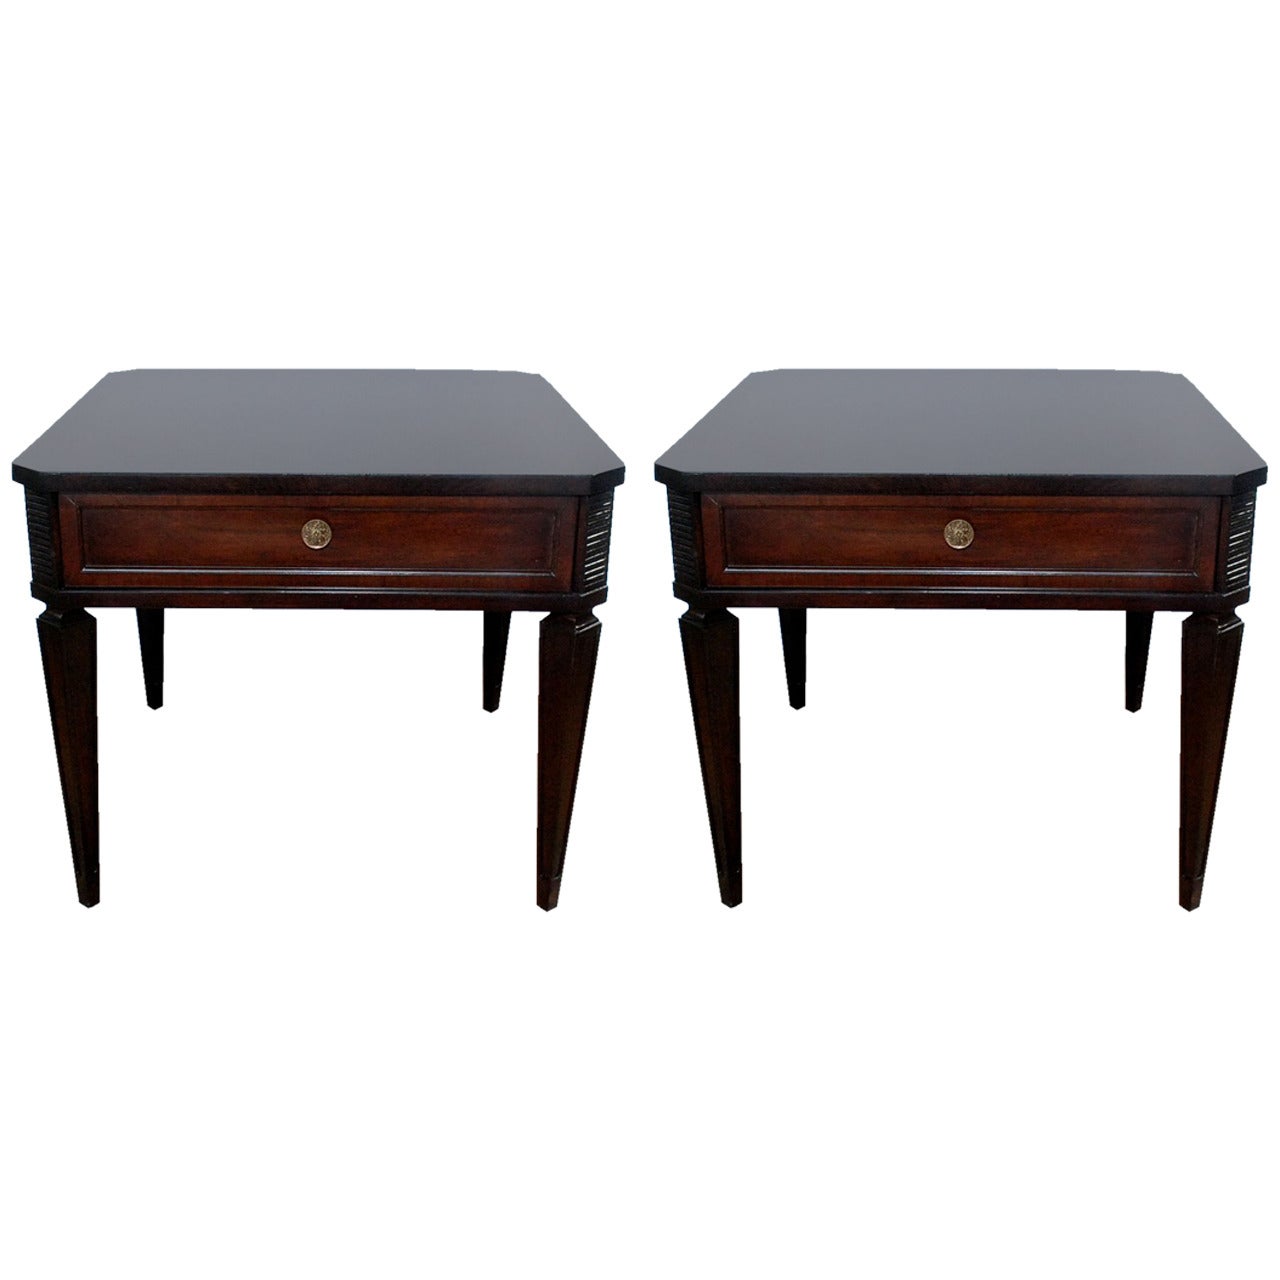 Pair of Side Tables or Nightstands by Drexel